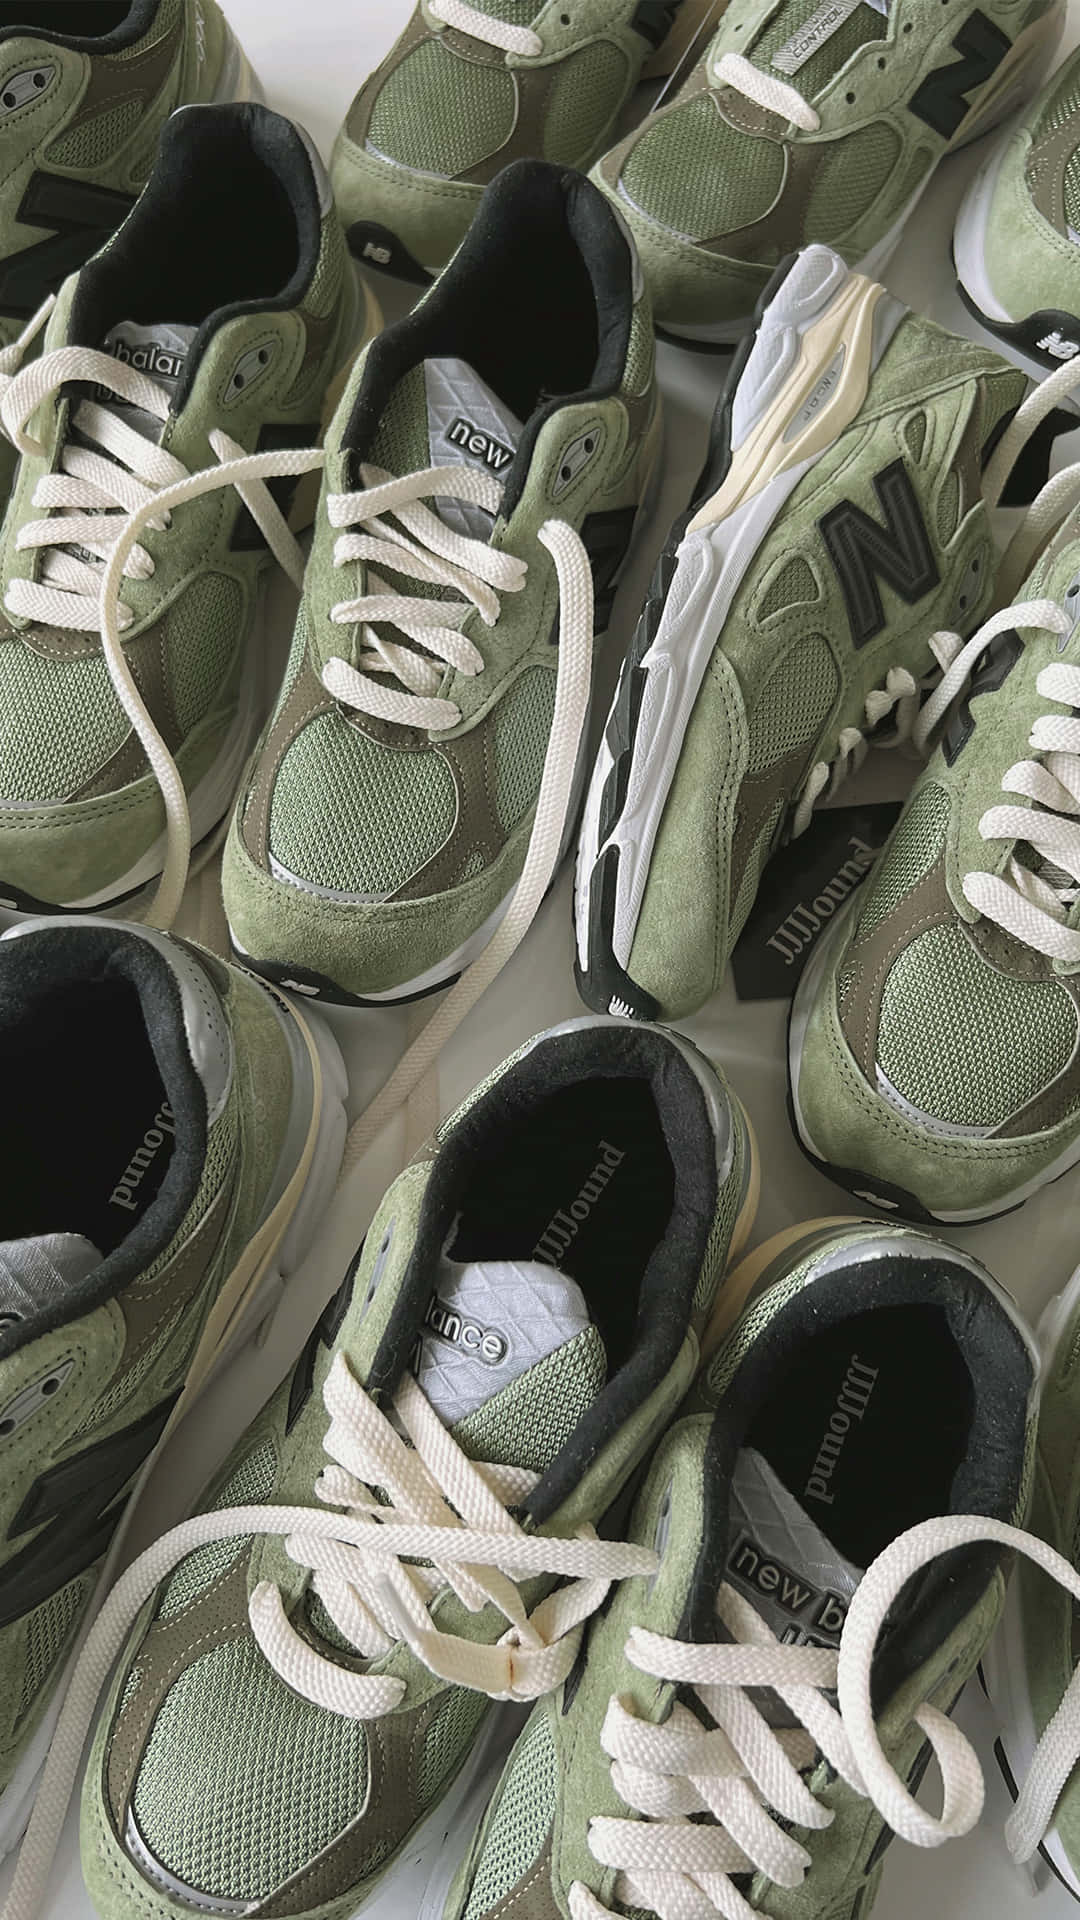 New Balance 990s Green Sneakers